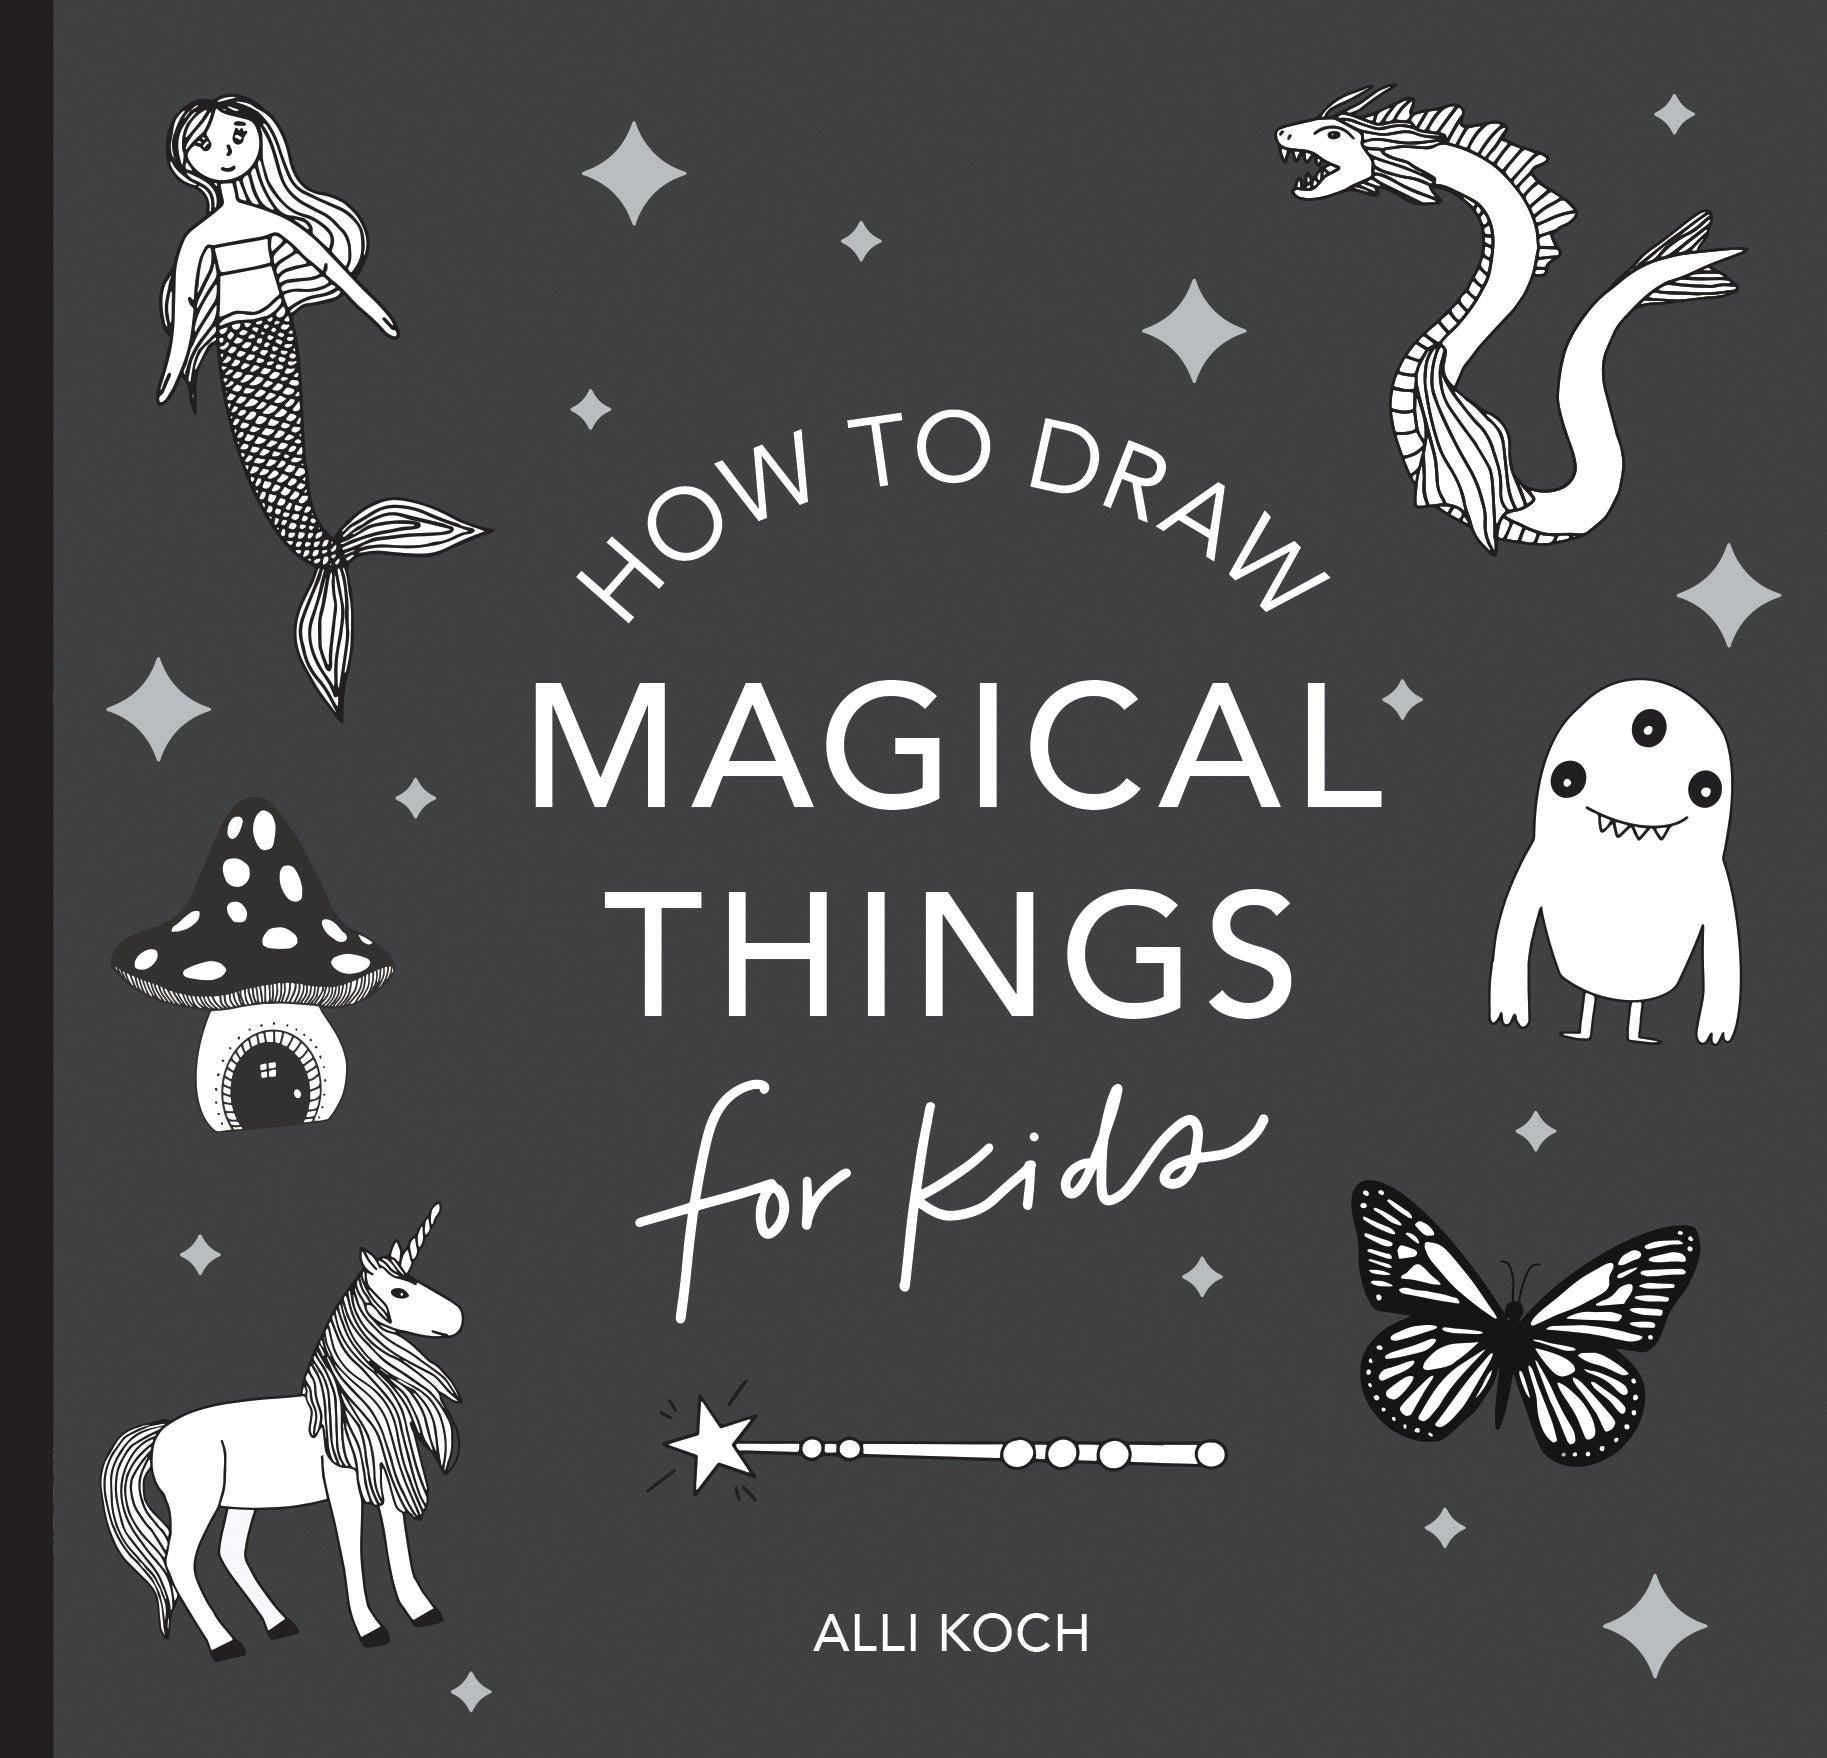 How to Draw Mini: Magical Things - for kids